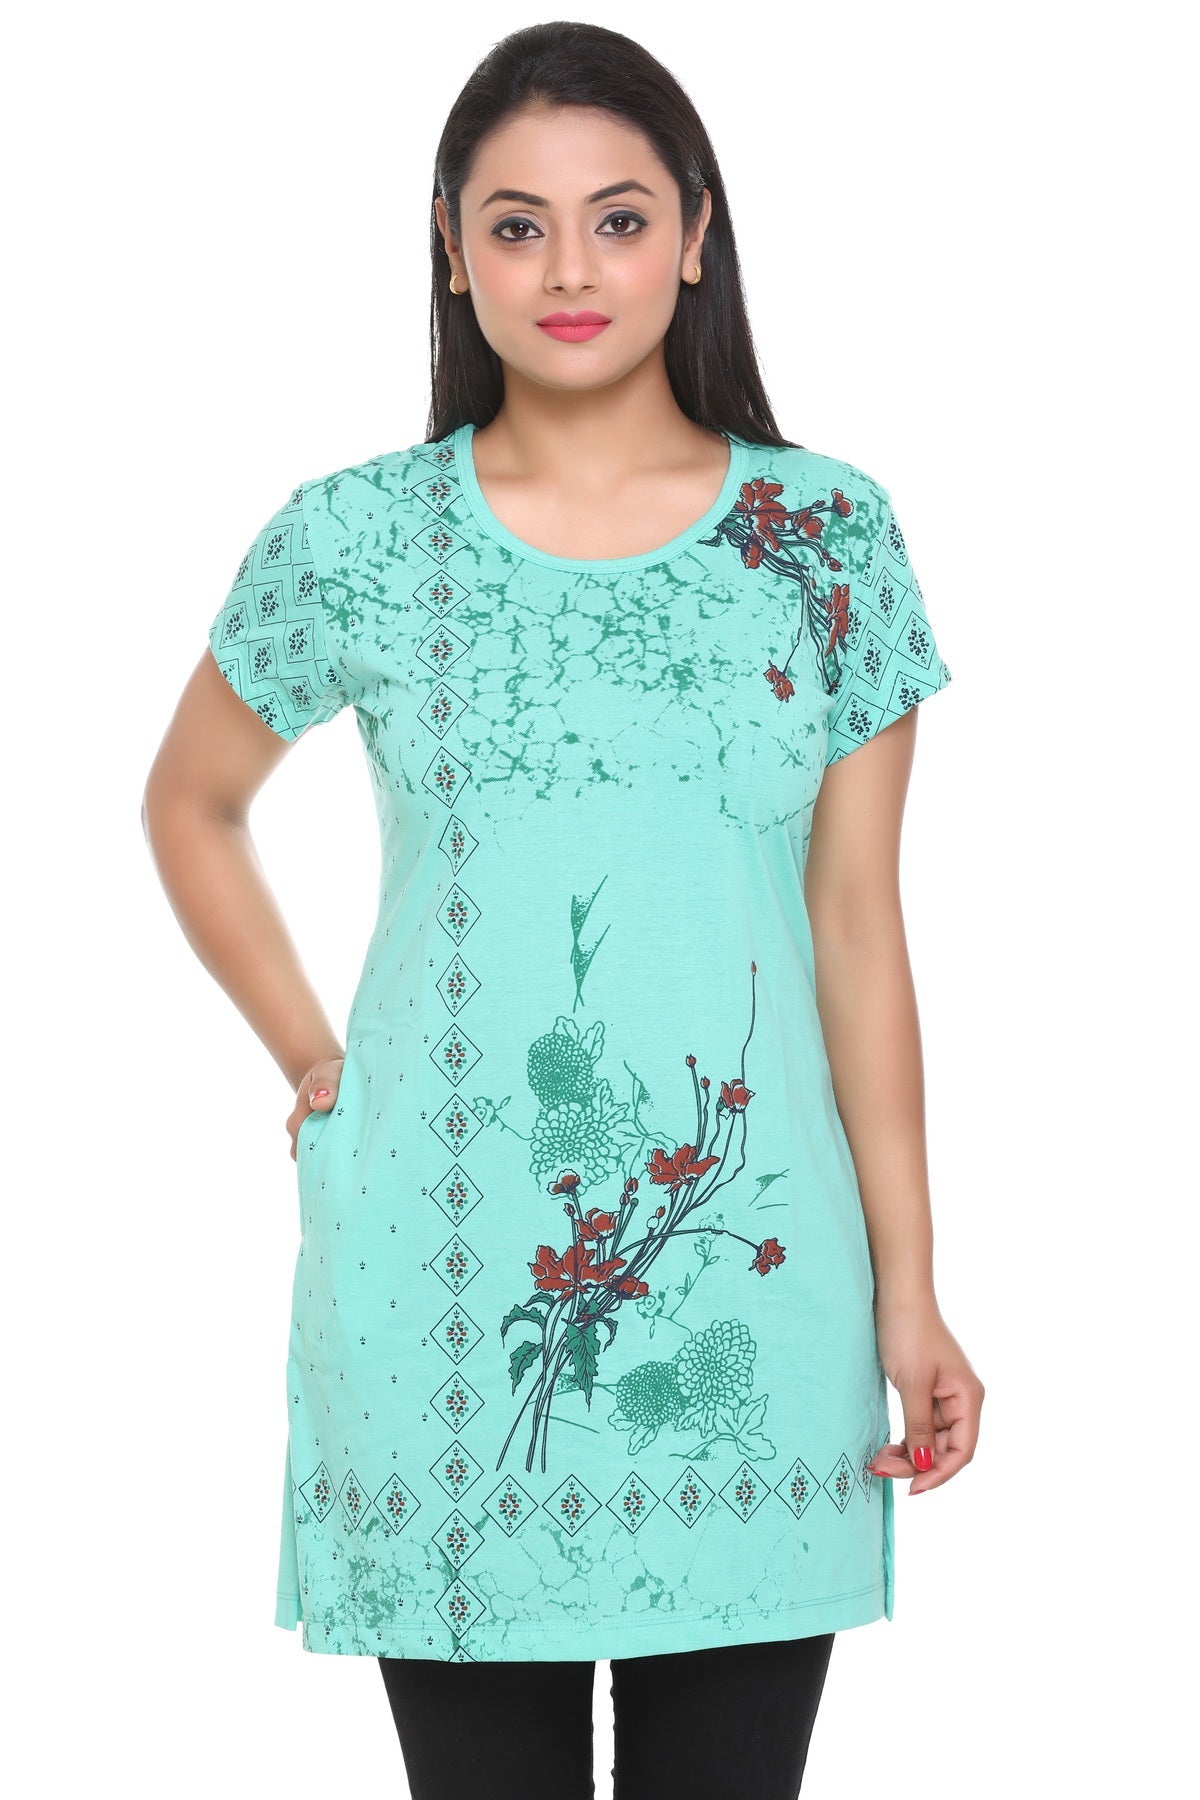 Cotton Printed Long T-shirts For Women Half Sleeve Multicolor